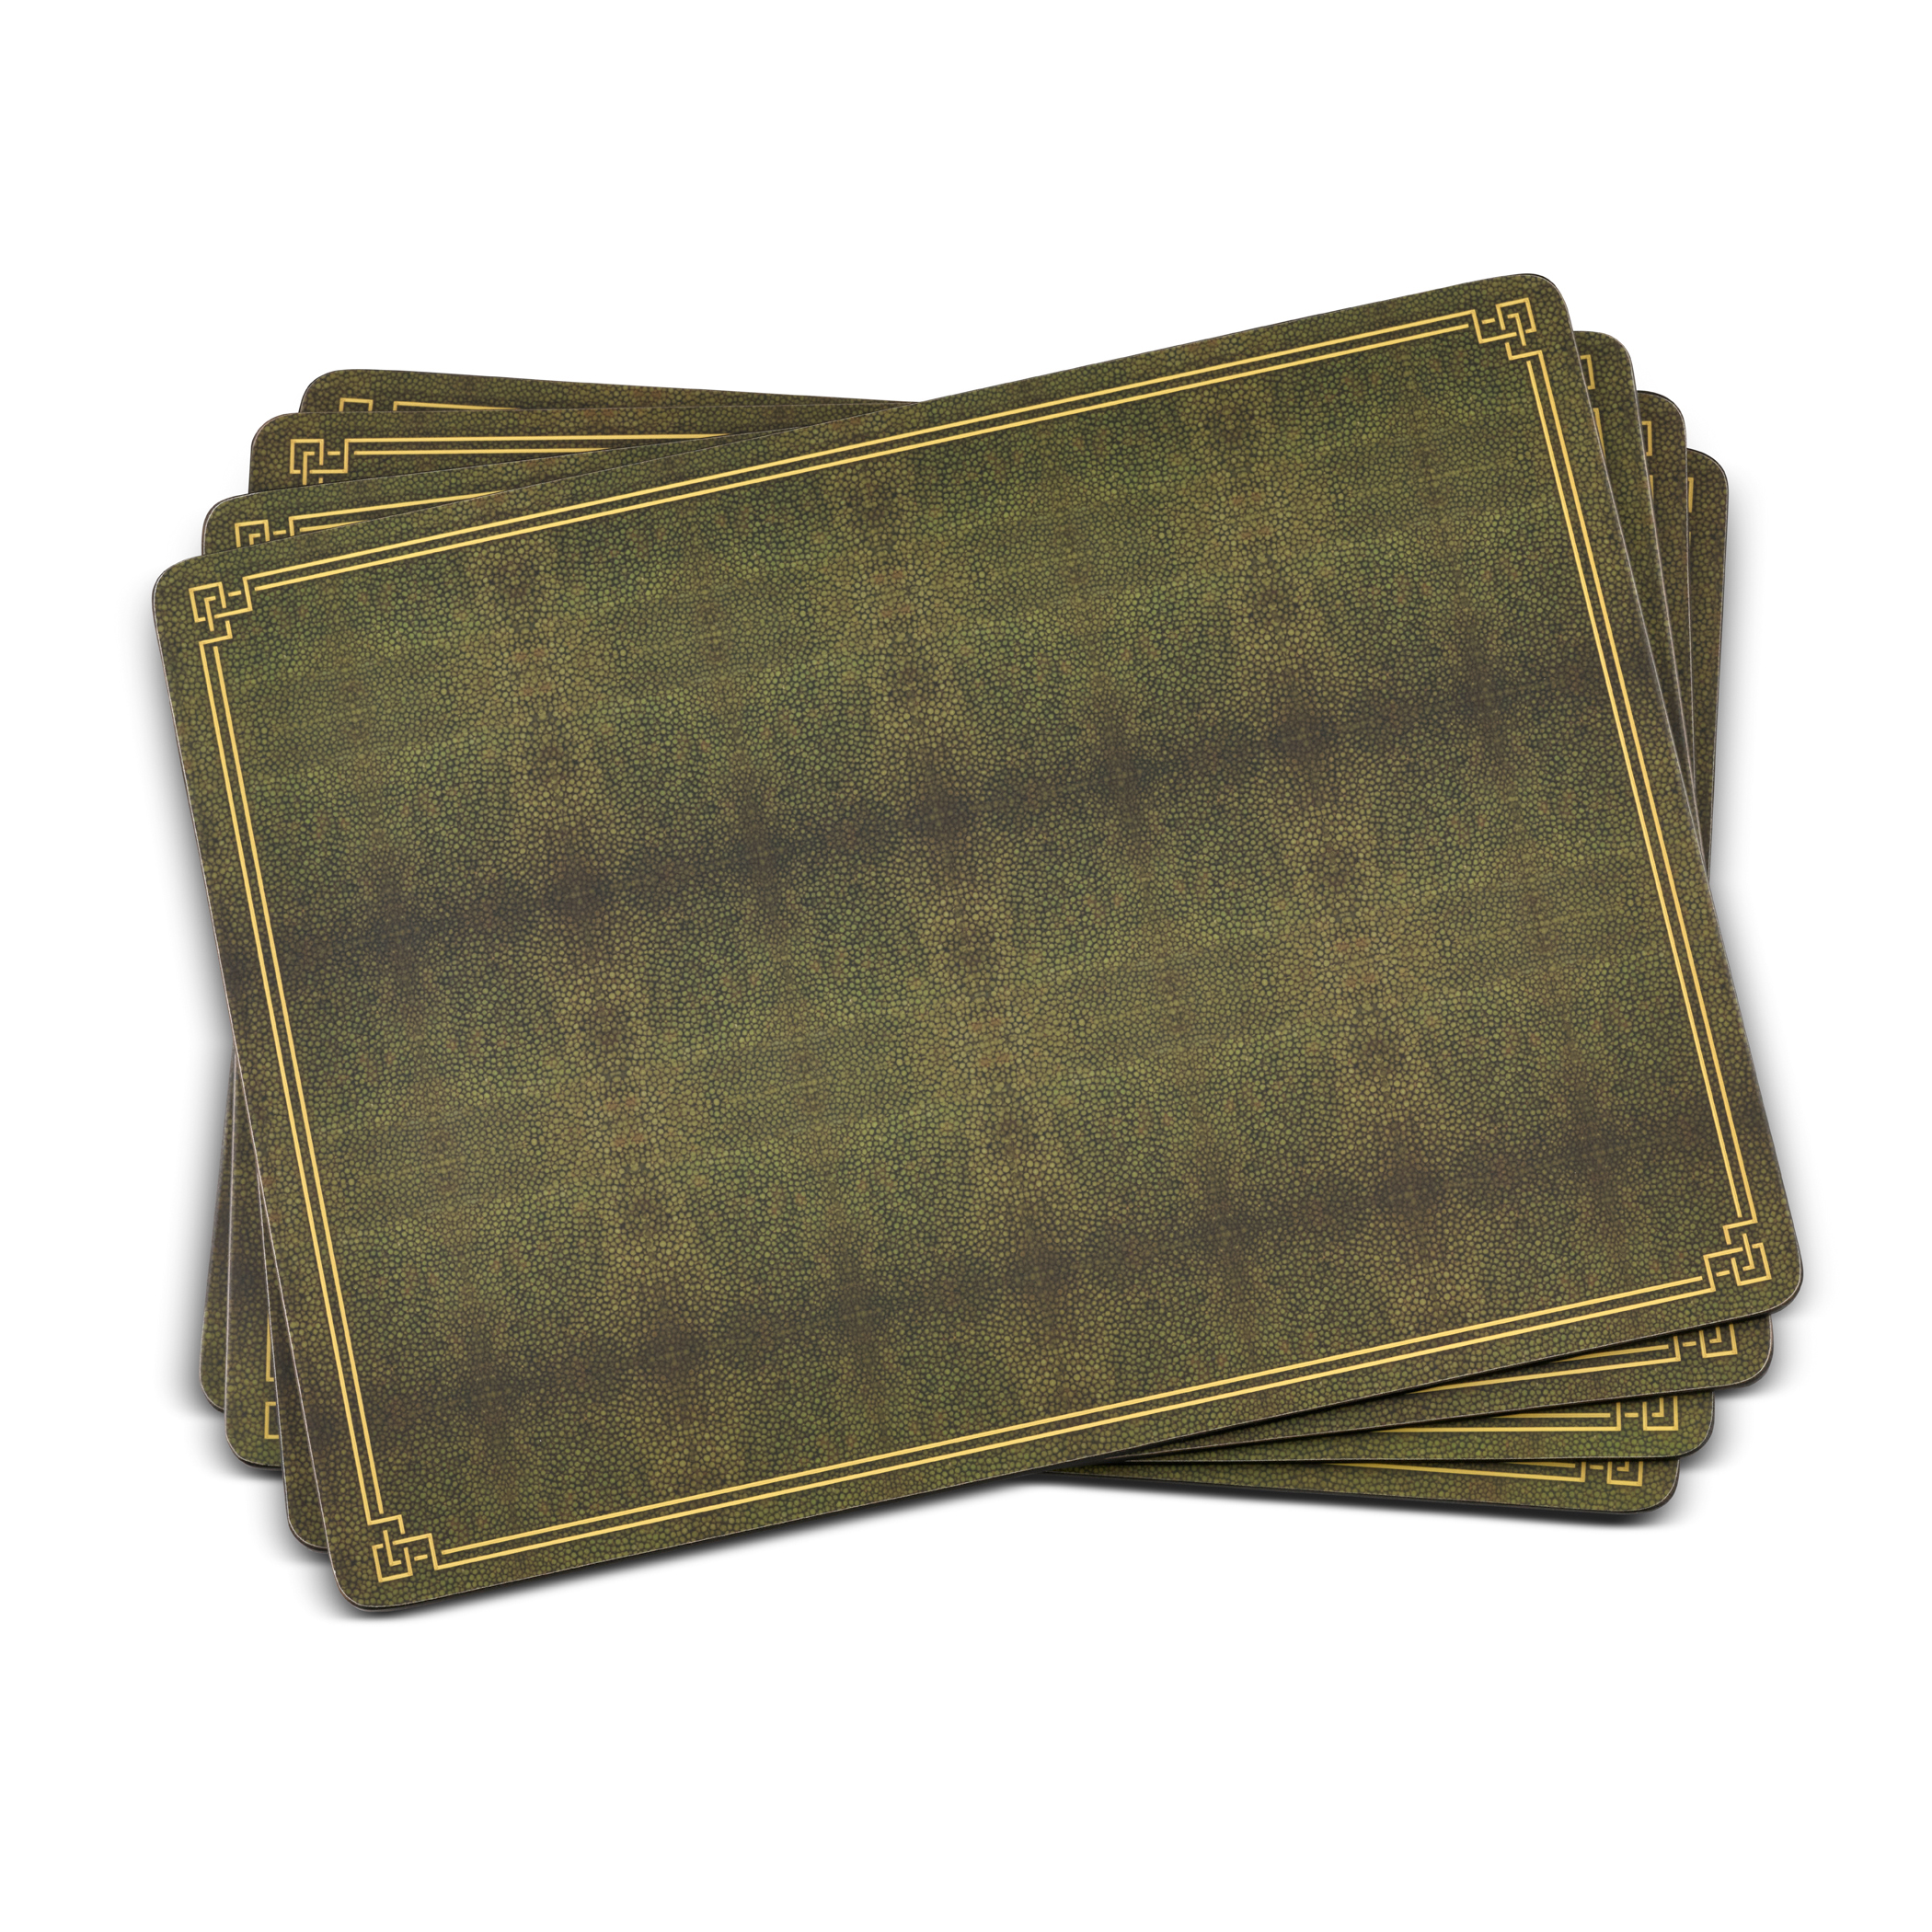 Pimpernel Shagreen Leather Placemats Set of 4 